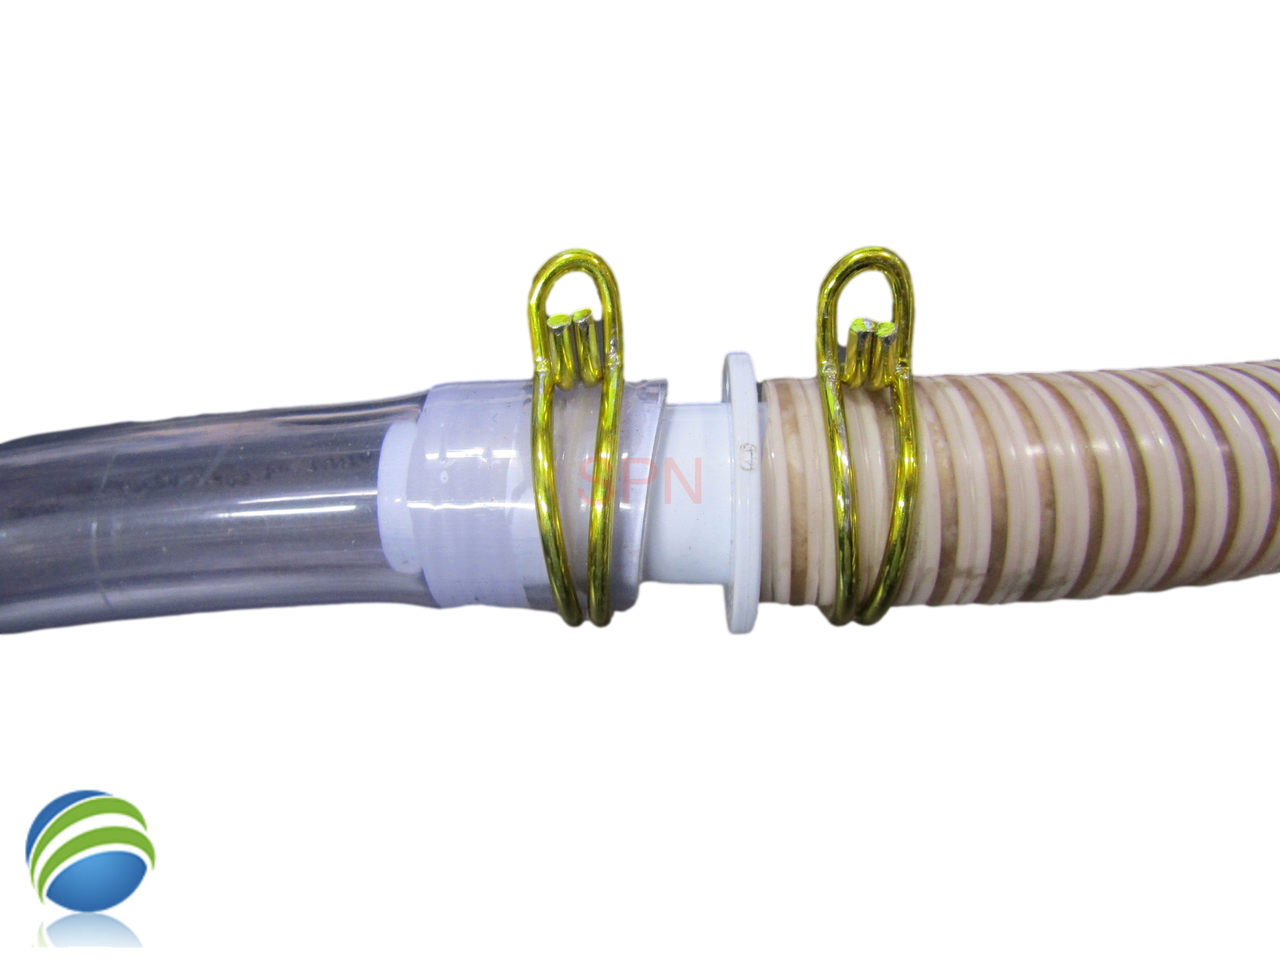 This kit will connect either Clear to Clear 3/4" ID tubing or Spiral to Clear 3/4" ID using the smooth side with the Spiral tubing..